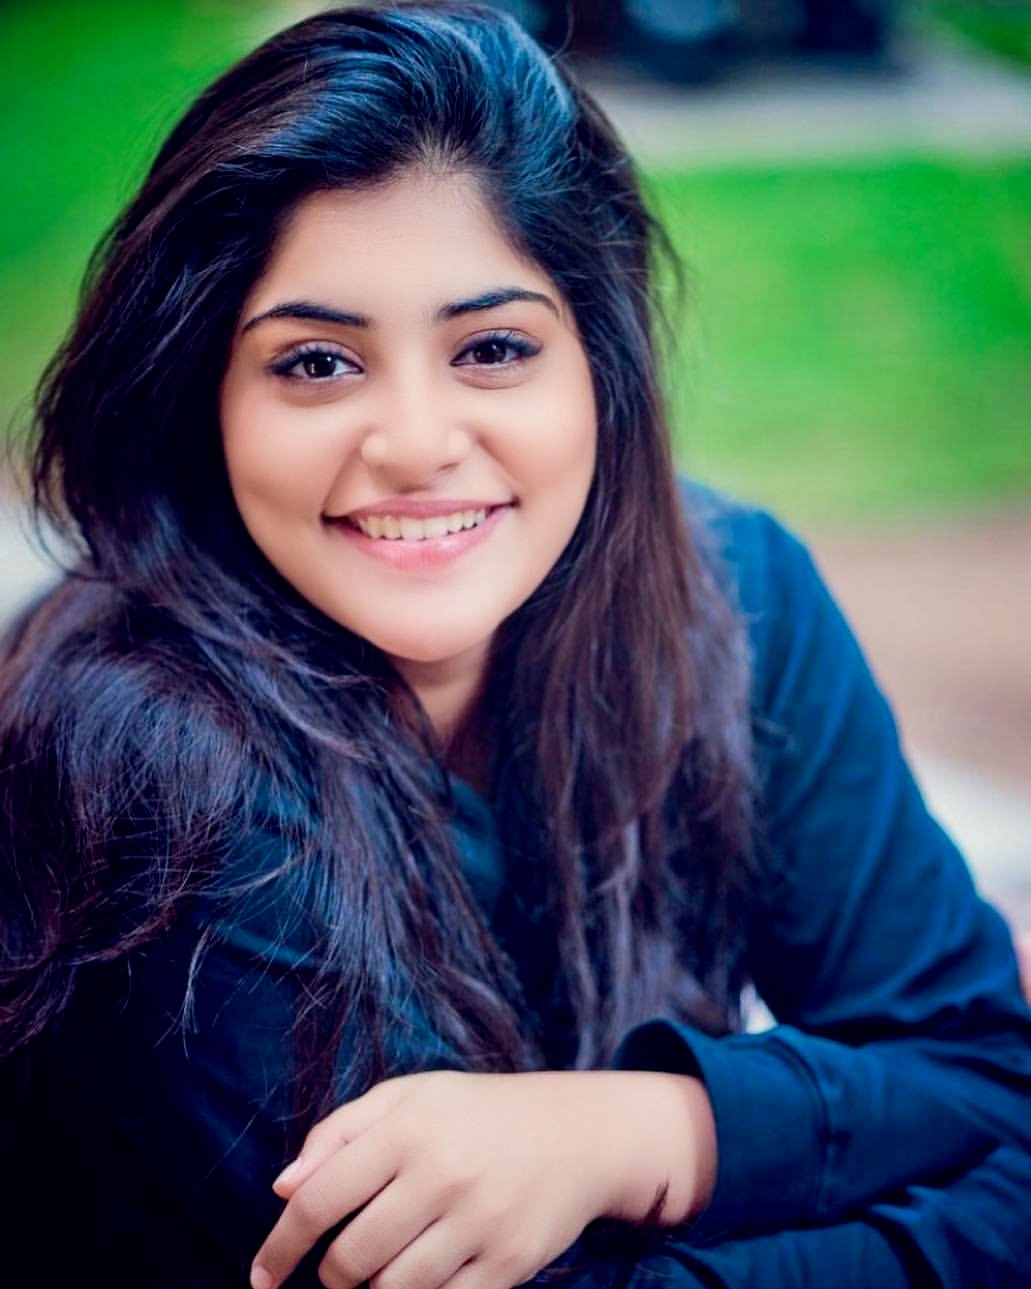 manjima-mohan-images-gallery-093-370